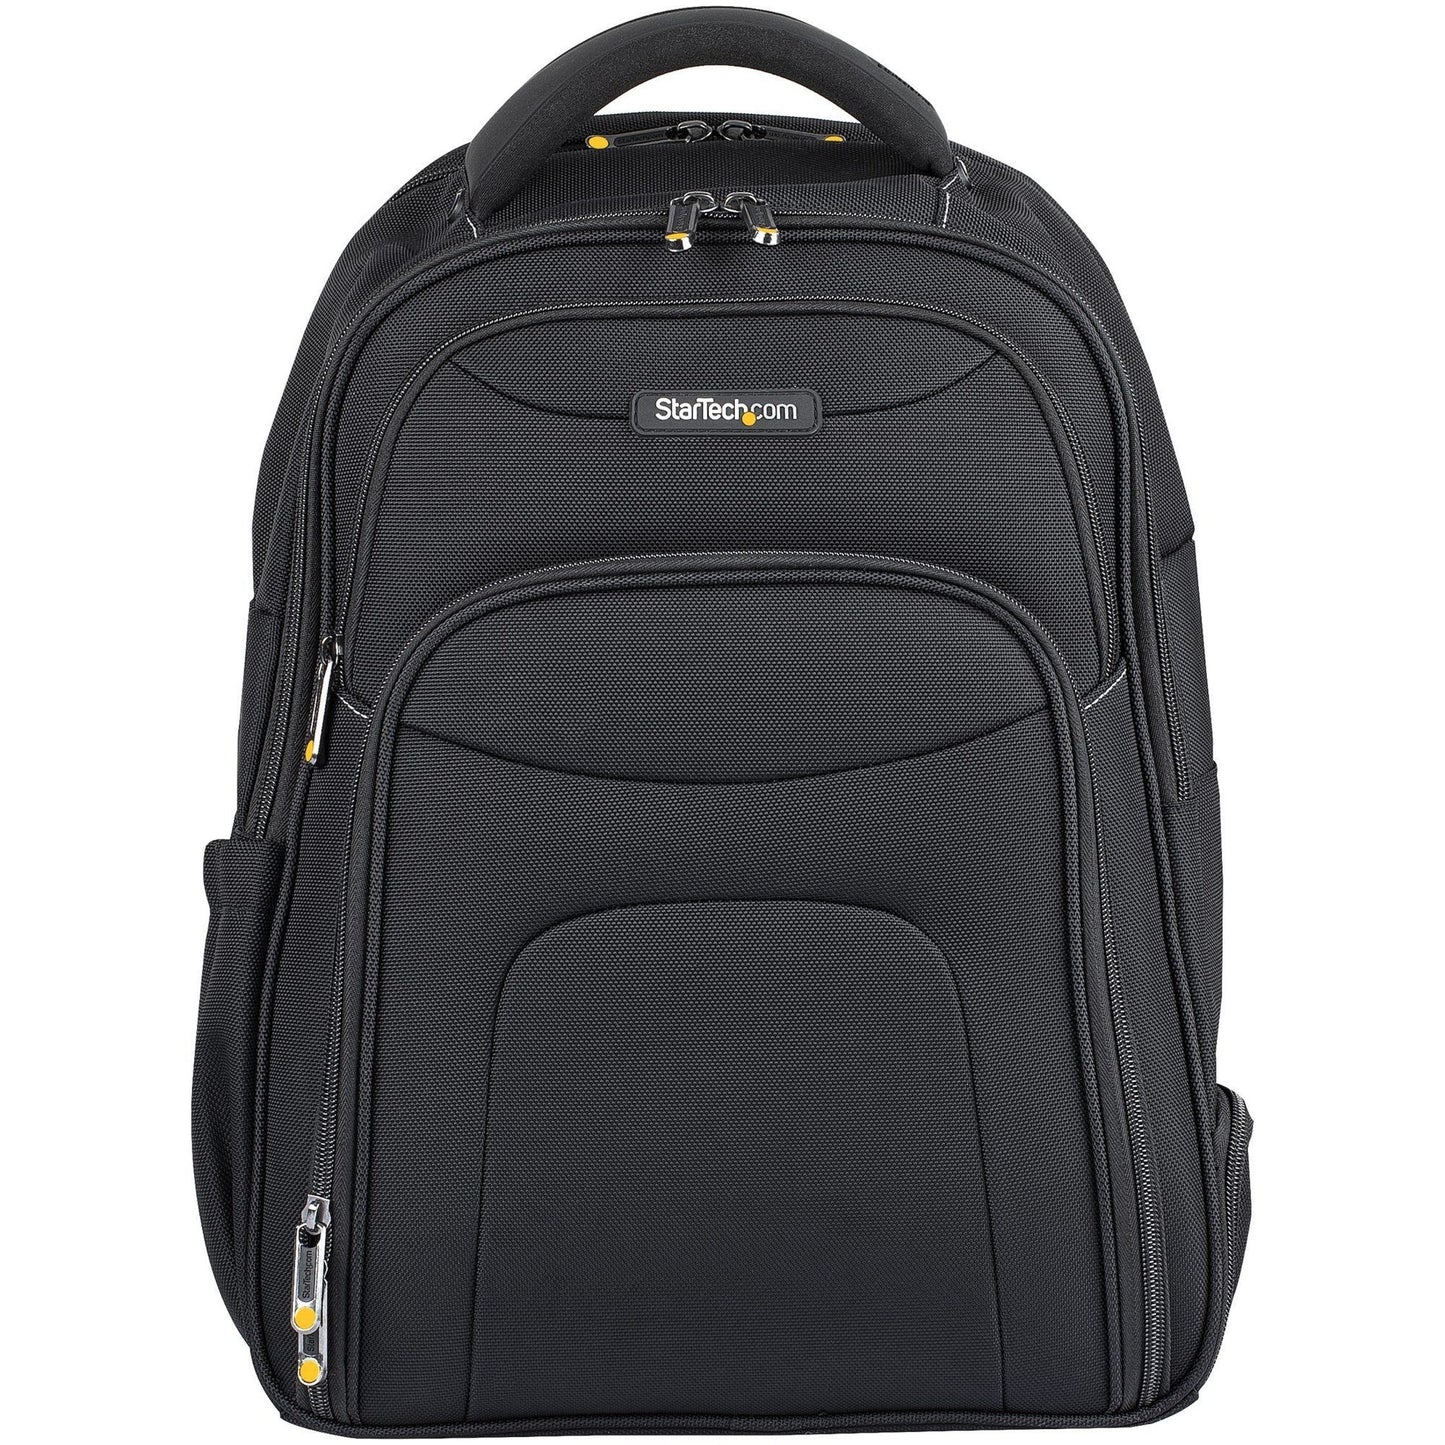 StarTech.com 17.3" Laptop Backpack w/ Removable Accessory Case Professional IT Tech Backpack for Work/Travel/Commute Nylon Computer Bag